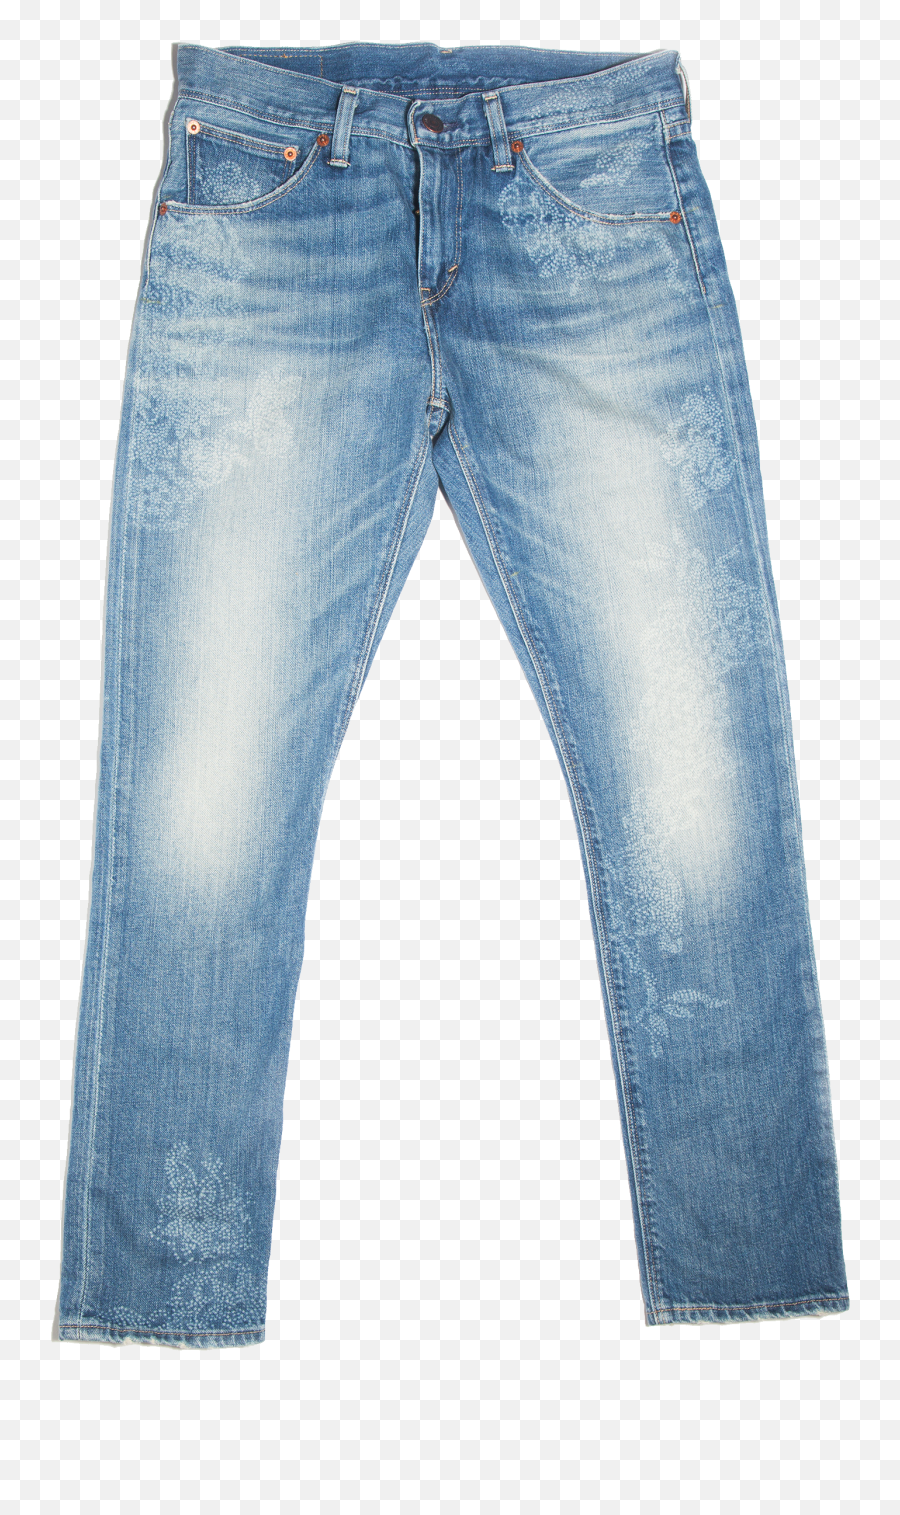 Jeans Clipart Png - Jeans Png Emoji,Jeans Clipart